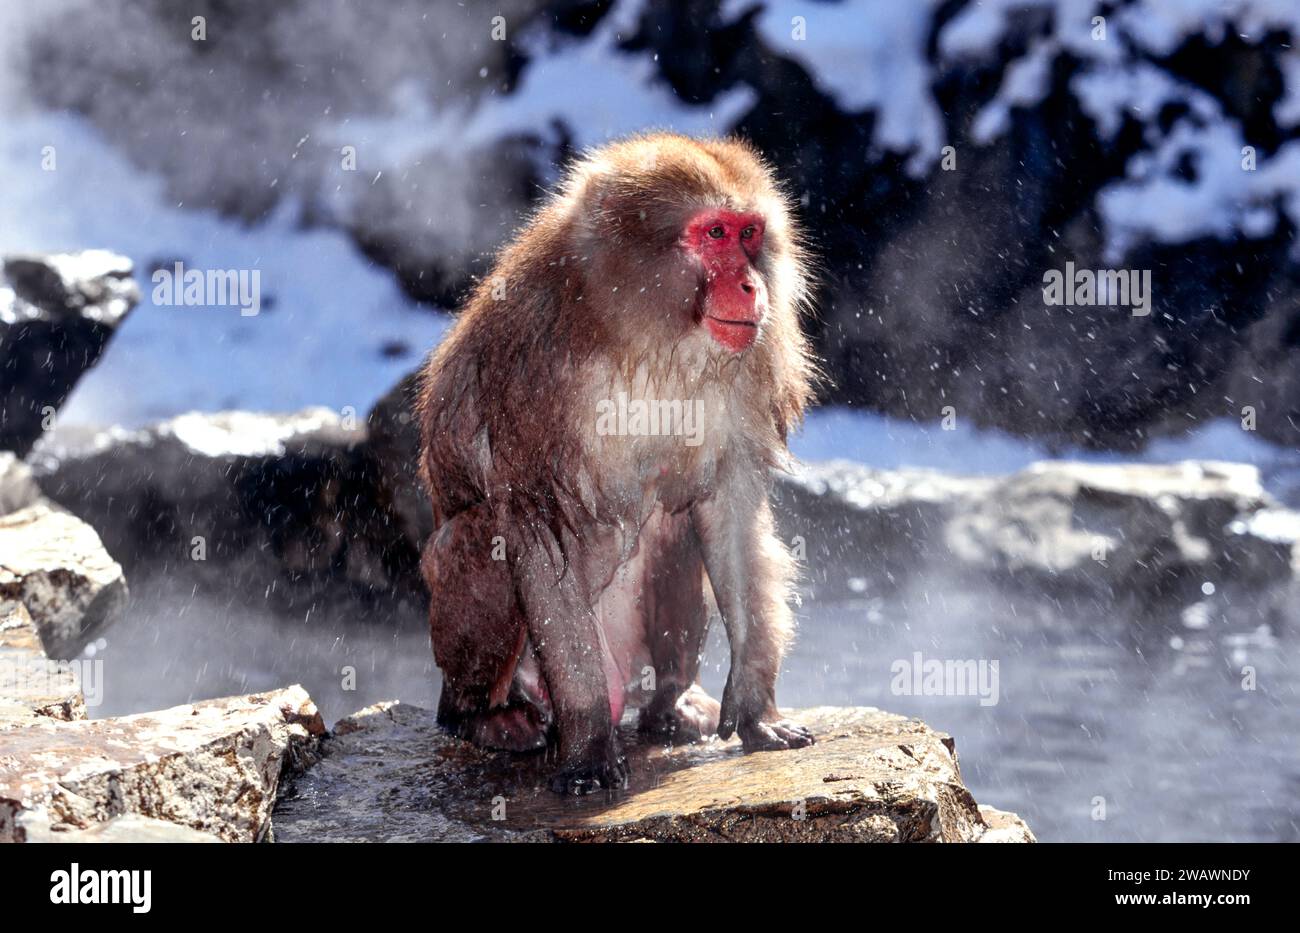 Japanese Macaque or Snow Monkey in winter near a hot spring pool and shaking water from its coat Stock Photo